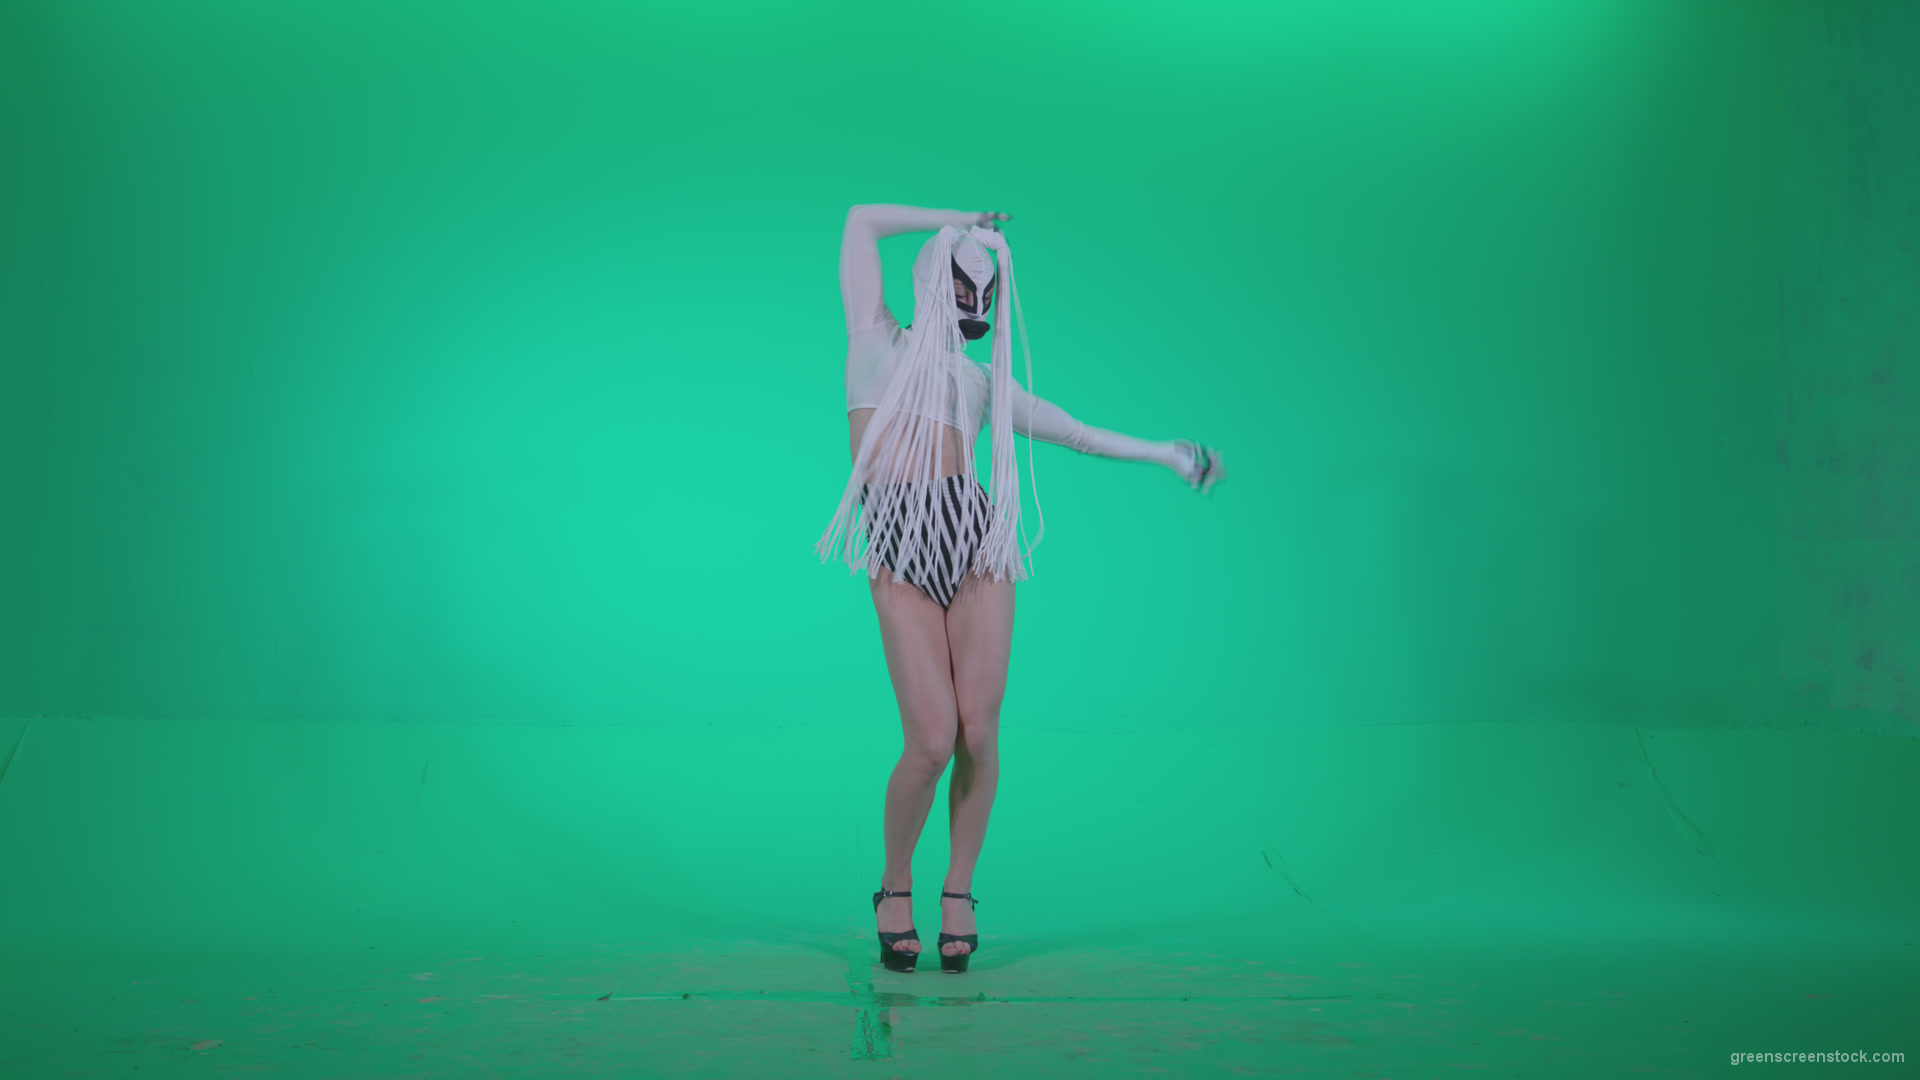 Go-go-Dancer-with-Latex-Top-t1-Green-Screen-Video-Footage_006 Green Screen Stock